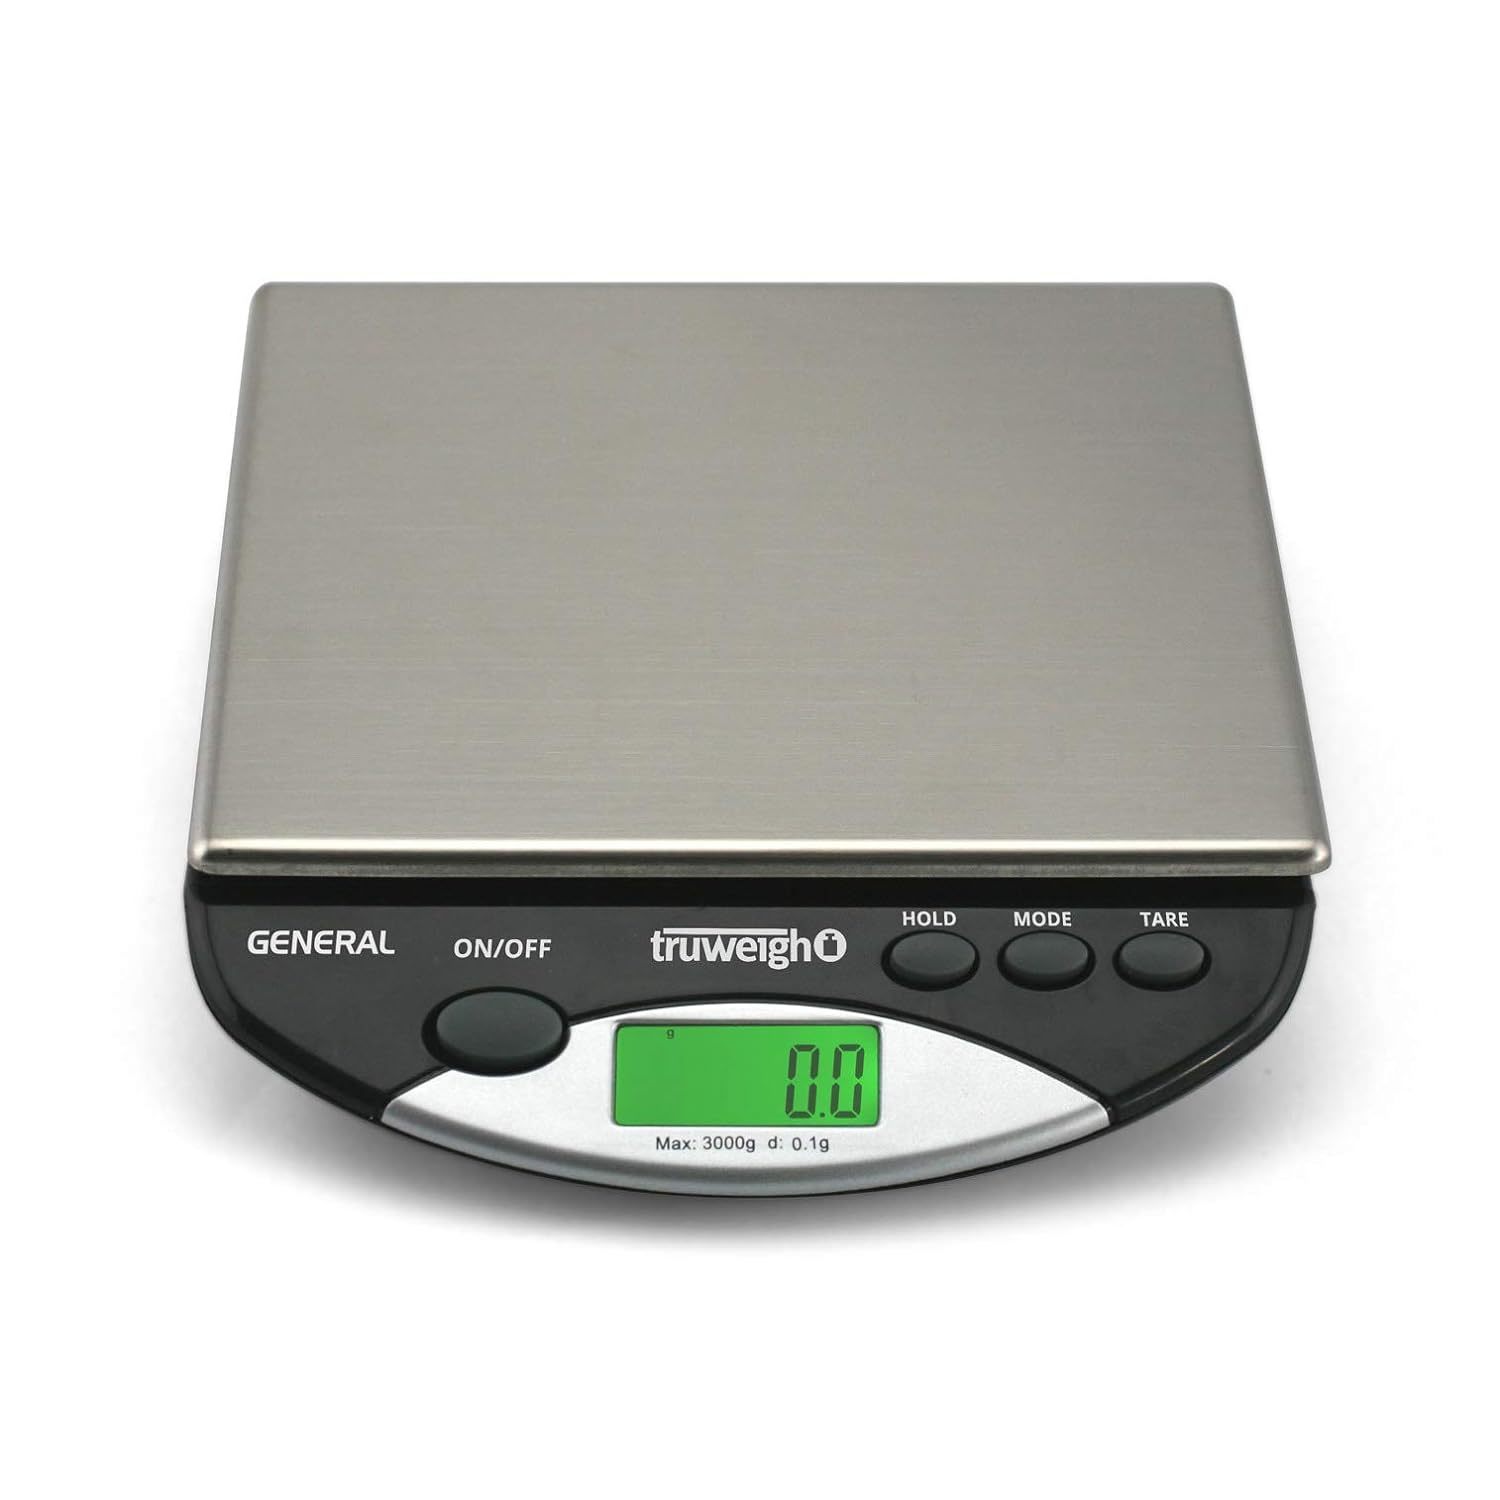  Ultra-Precise USB Rechargeable Kitchen Scale,200g/0.01